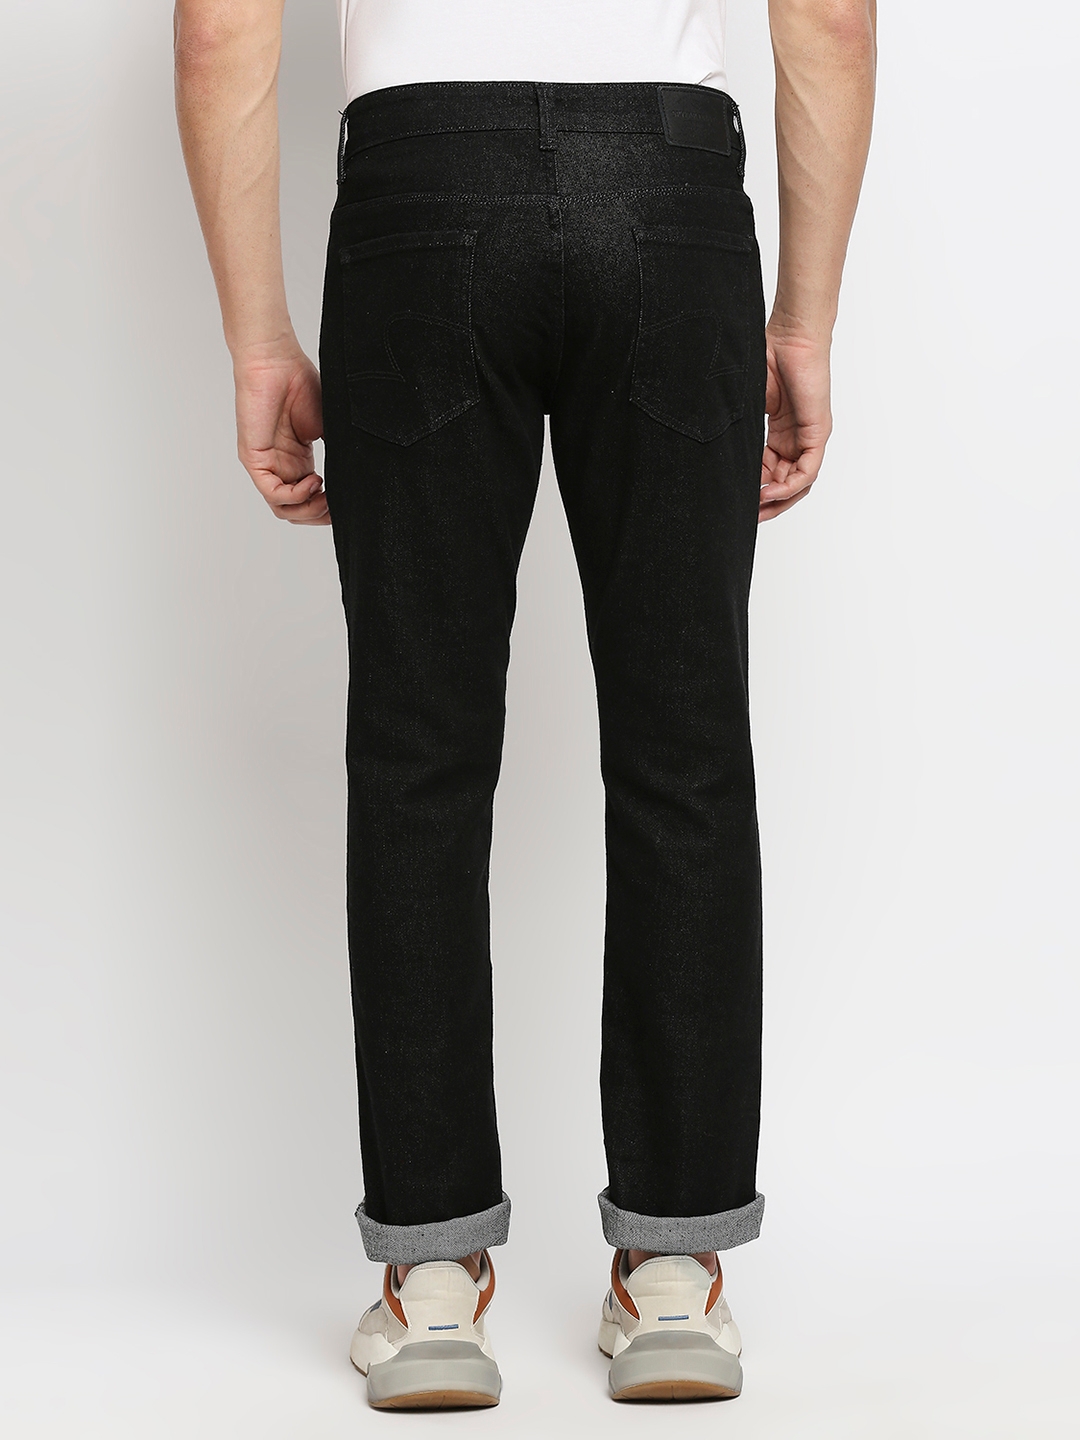 Men's Black Cotton Solid Tapered Jeans